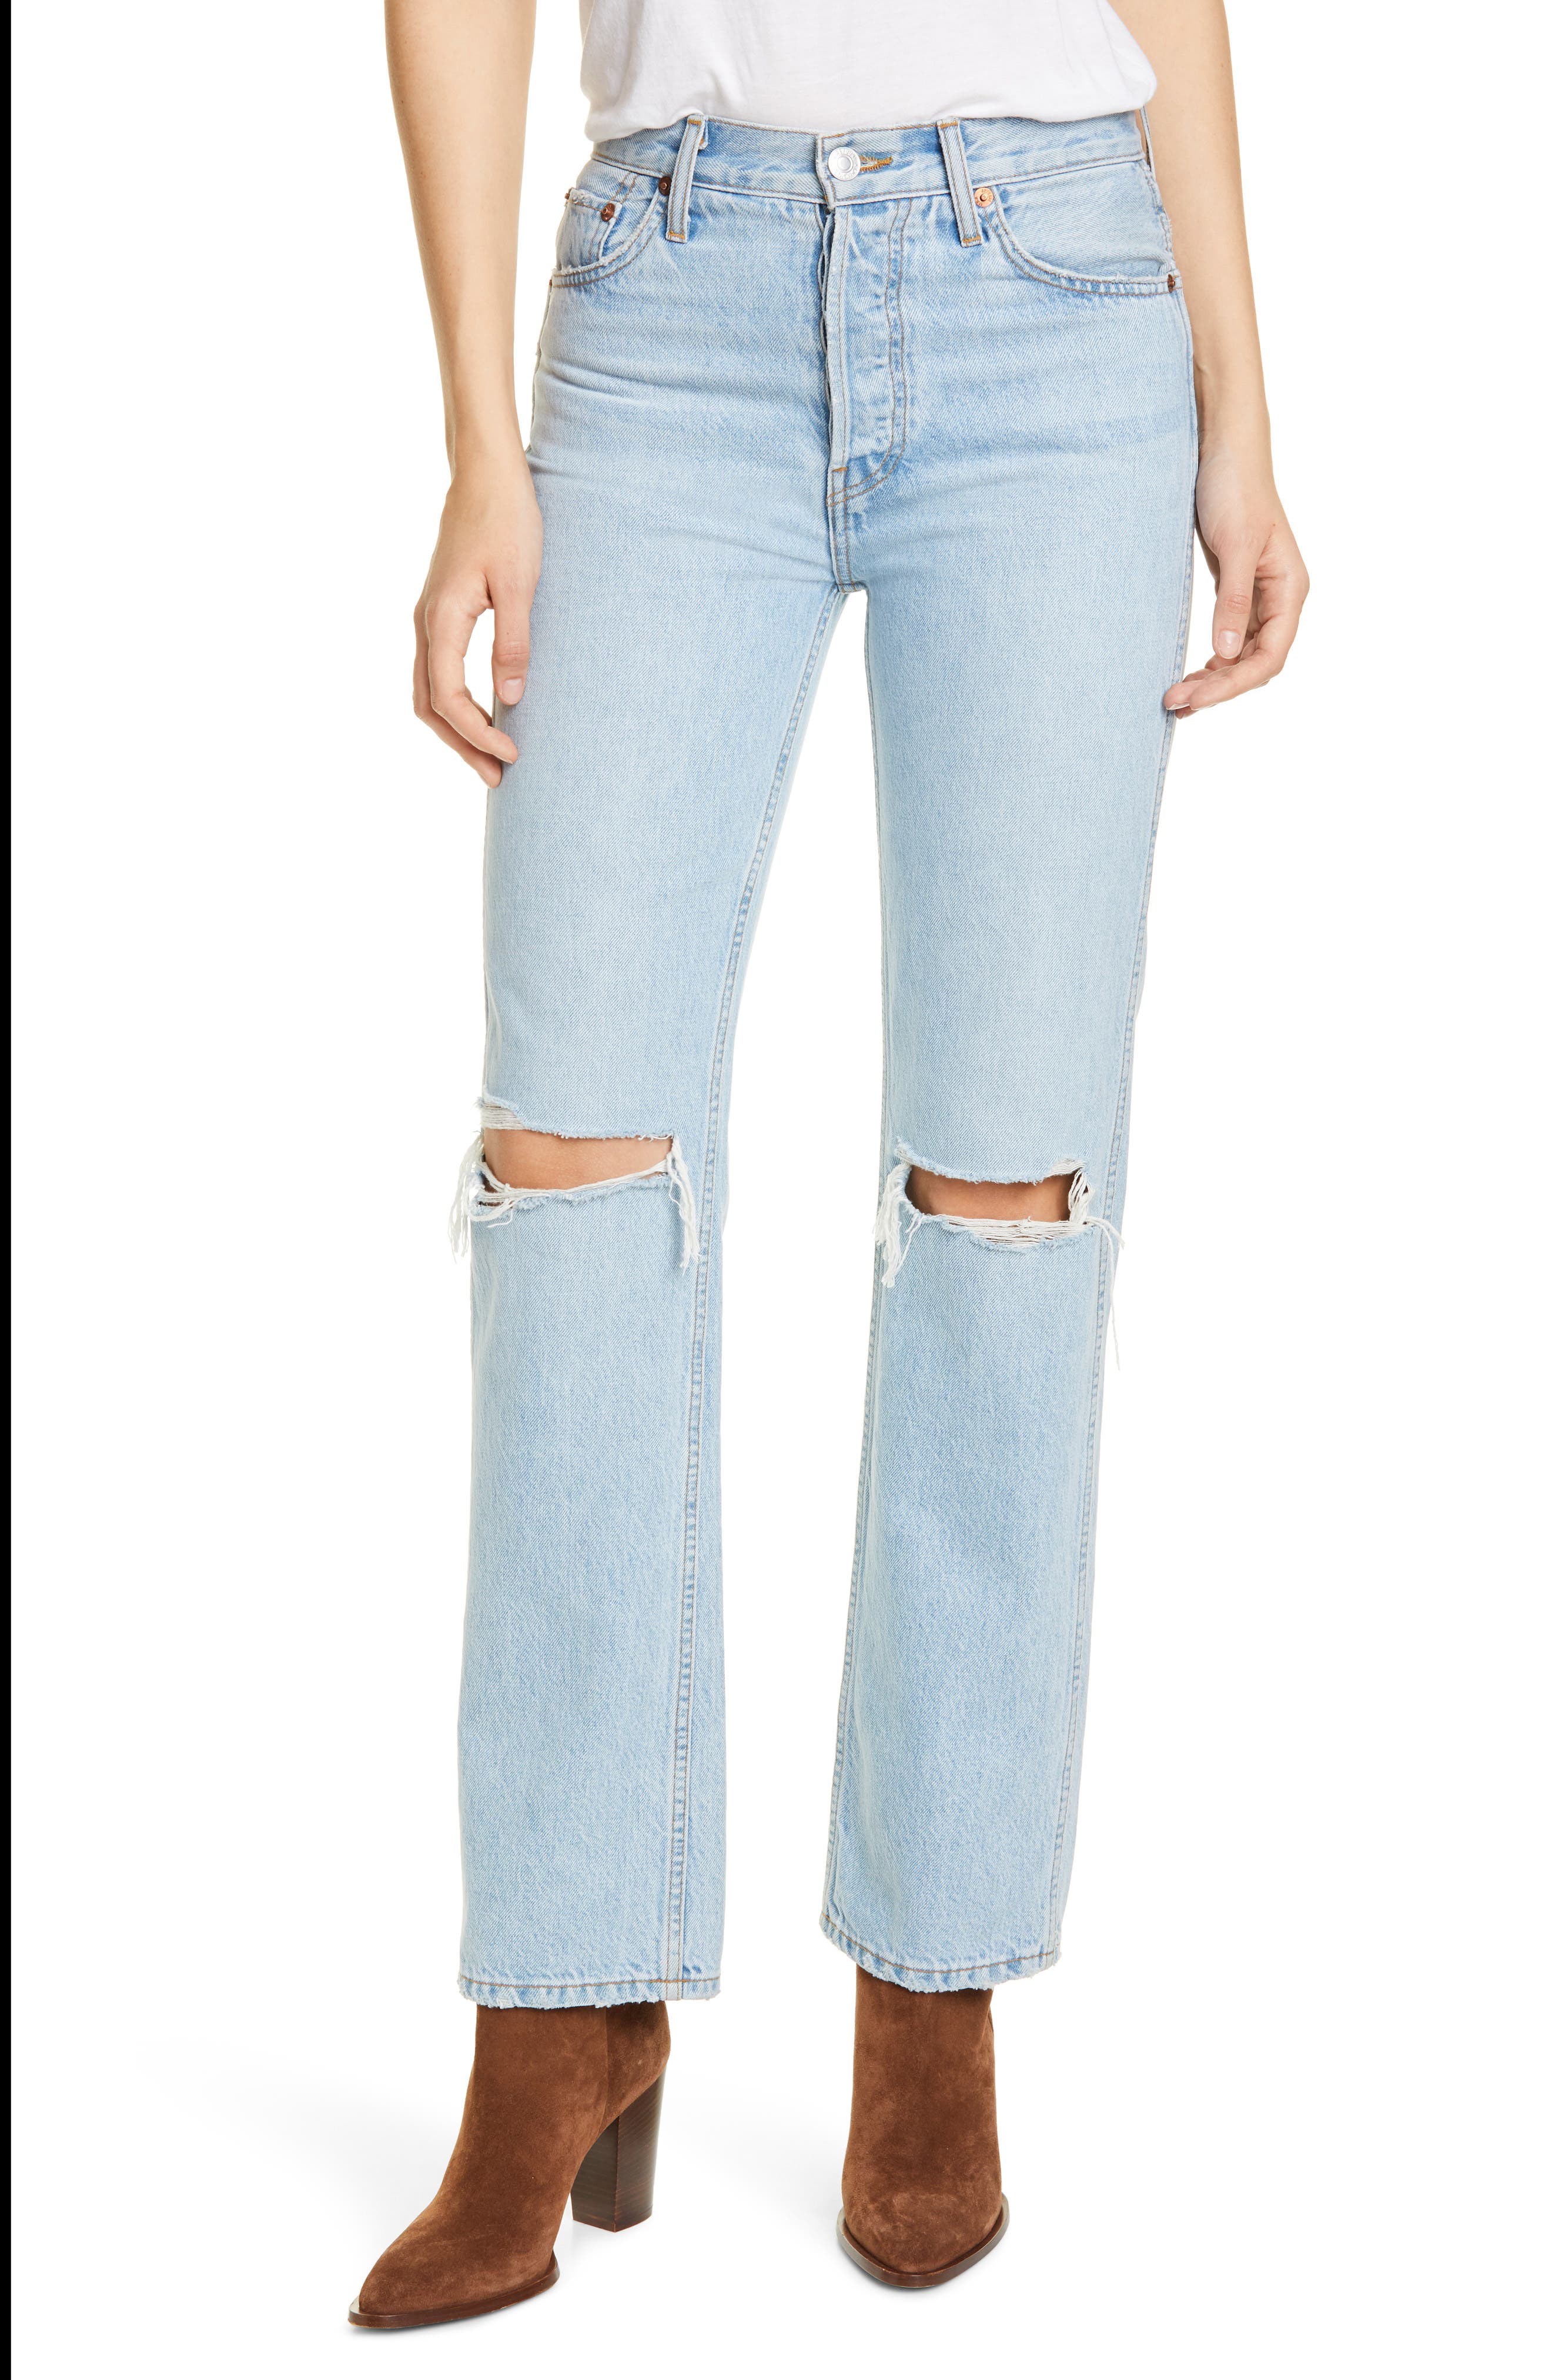 skinny jeans that are tight around the ankle